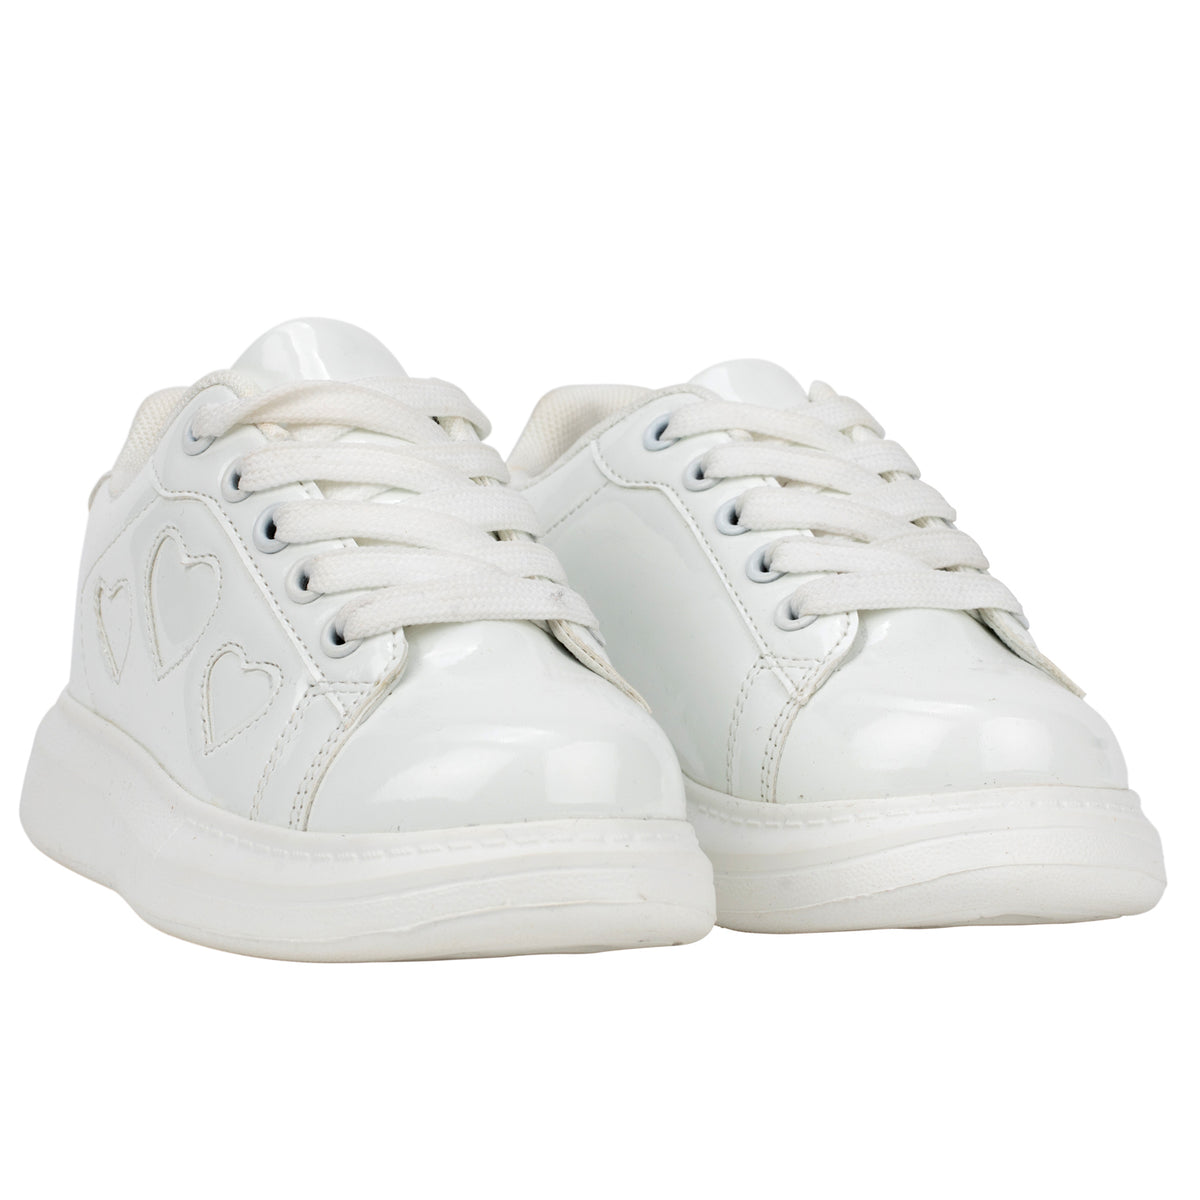 A Dee Girls 'Queeny' White Chunky Trainers